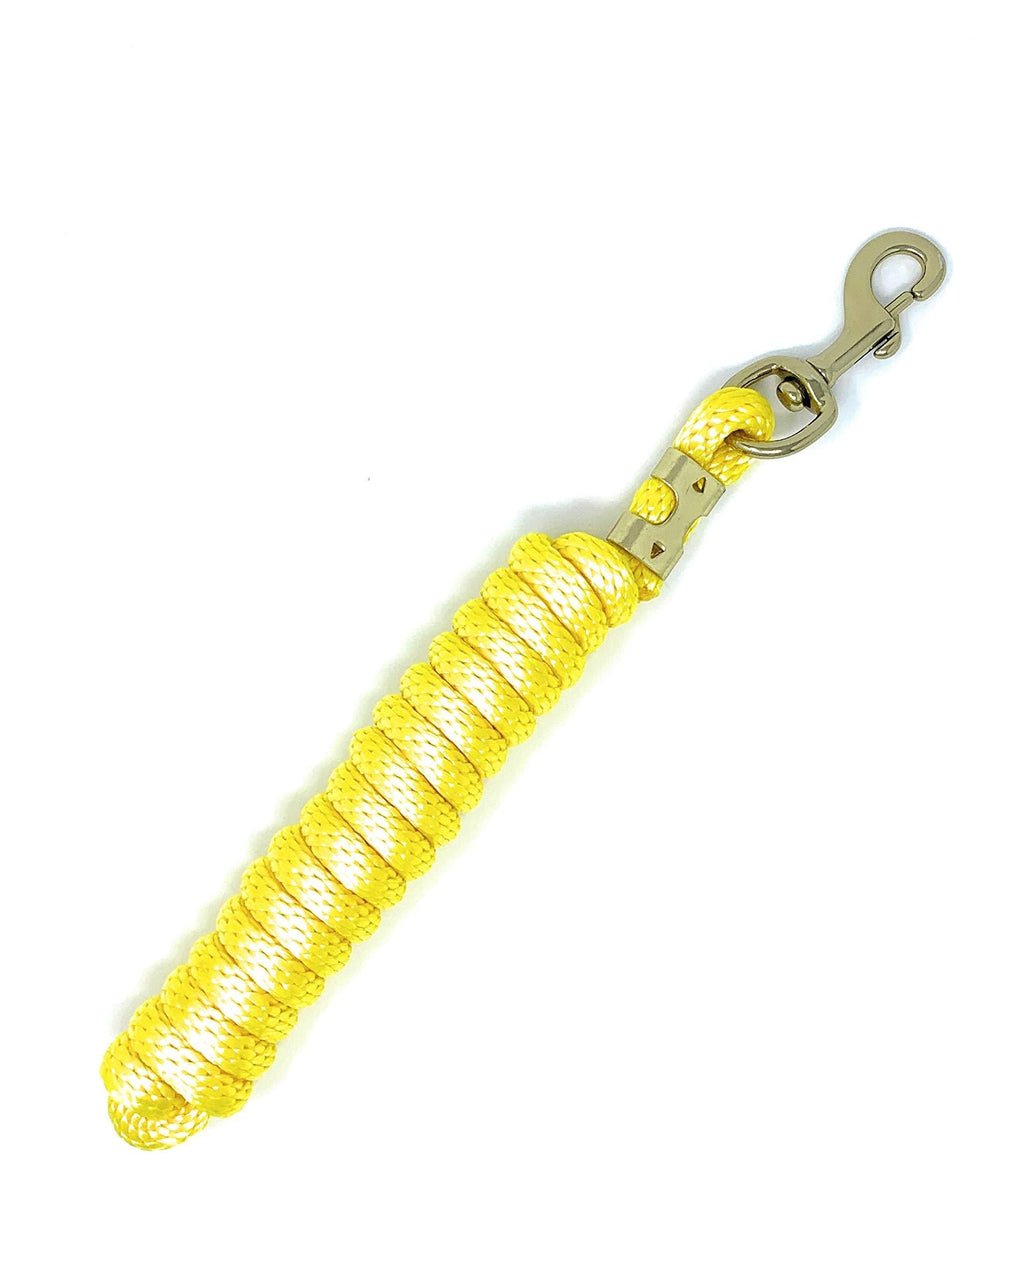 [Australia] - Lead Ropes for Horses l 10 Foot Strong Poly l Soft, Broken in Feel l Handmade in The USA l Heavy Duty Brass Snap l Lots of Vibrant Colors l Compatible with The Safe Clip by Smart Tie yellow 